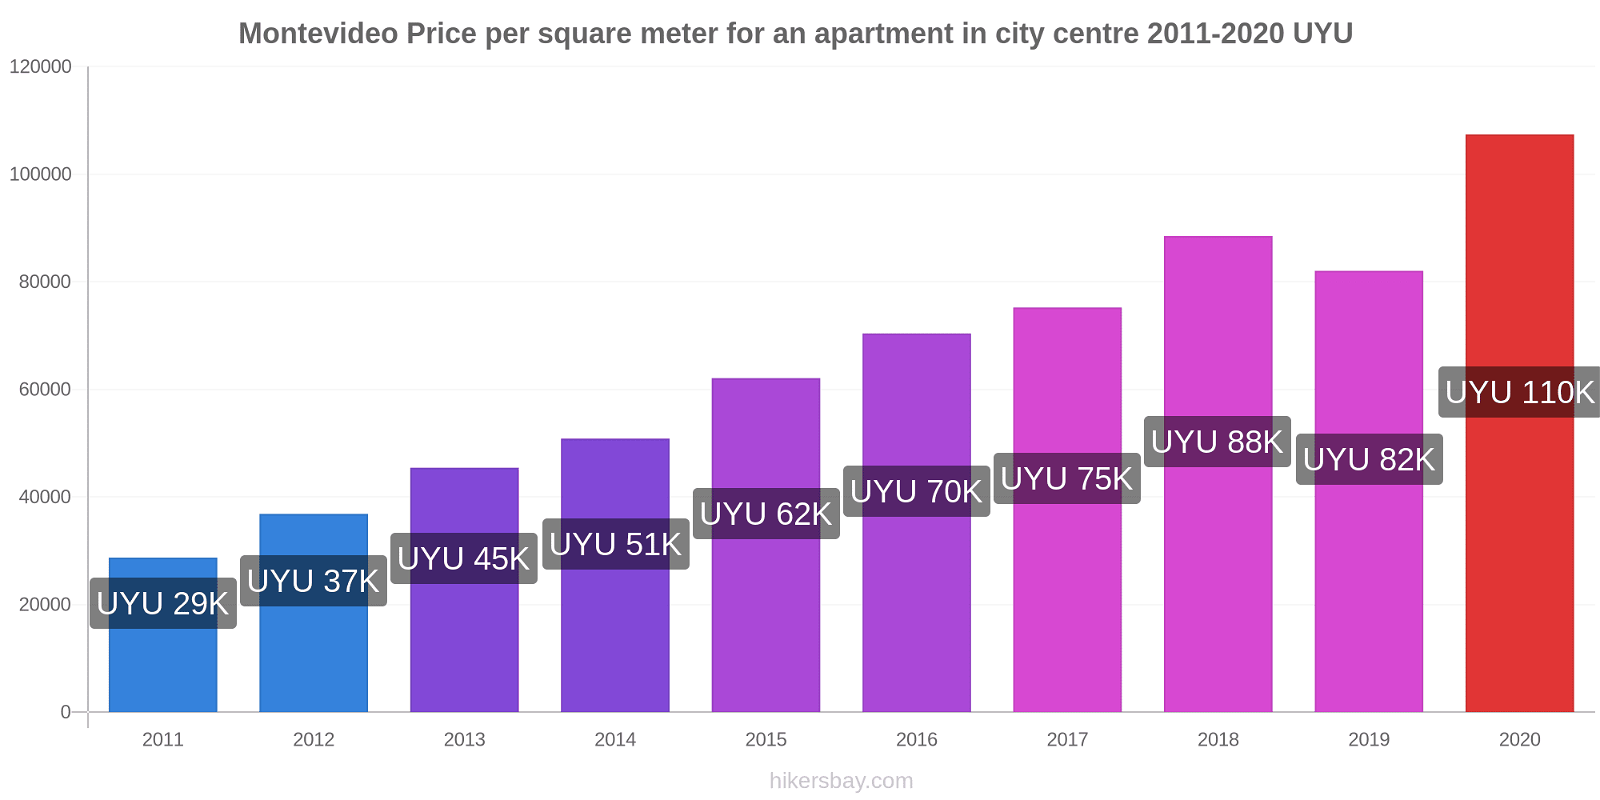 Montevideo price changes Price per square meter for an apartment in city centre hikersbay.com